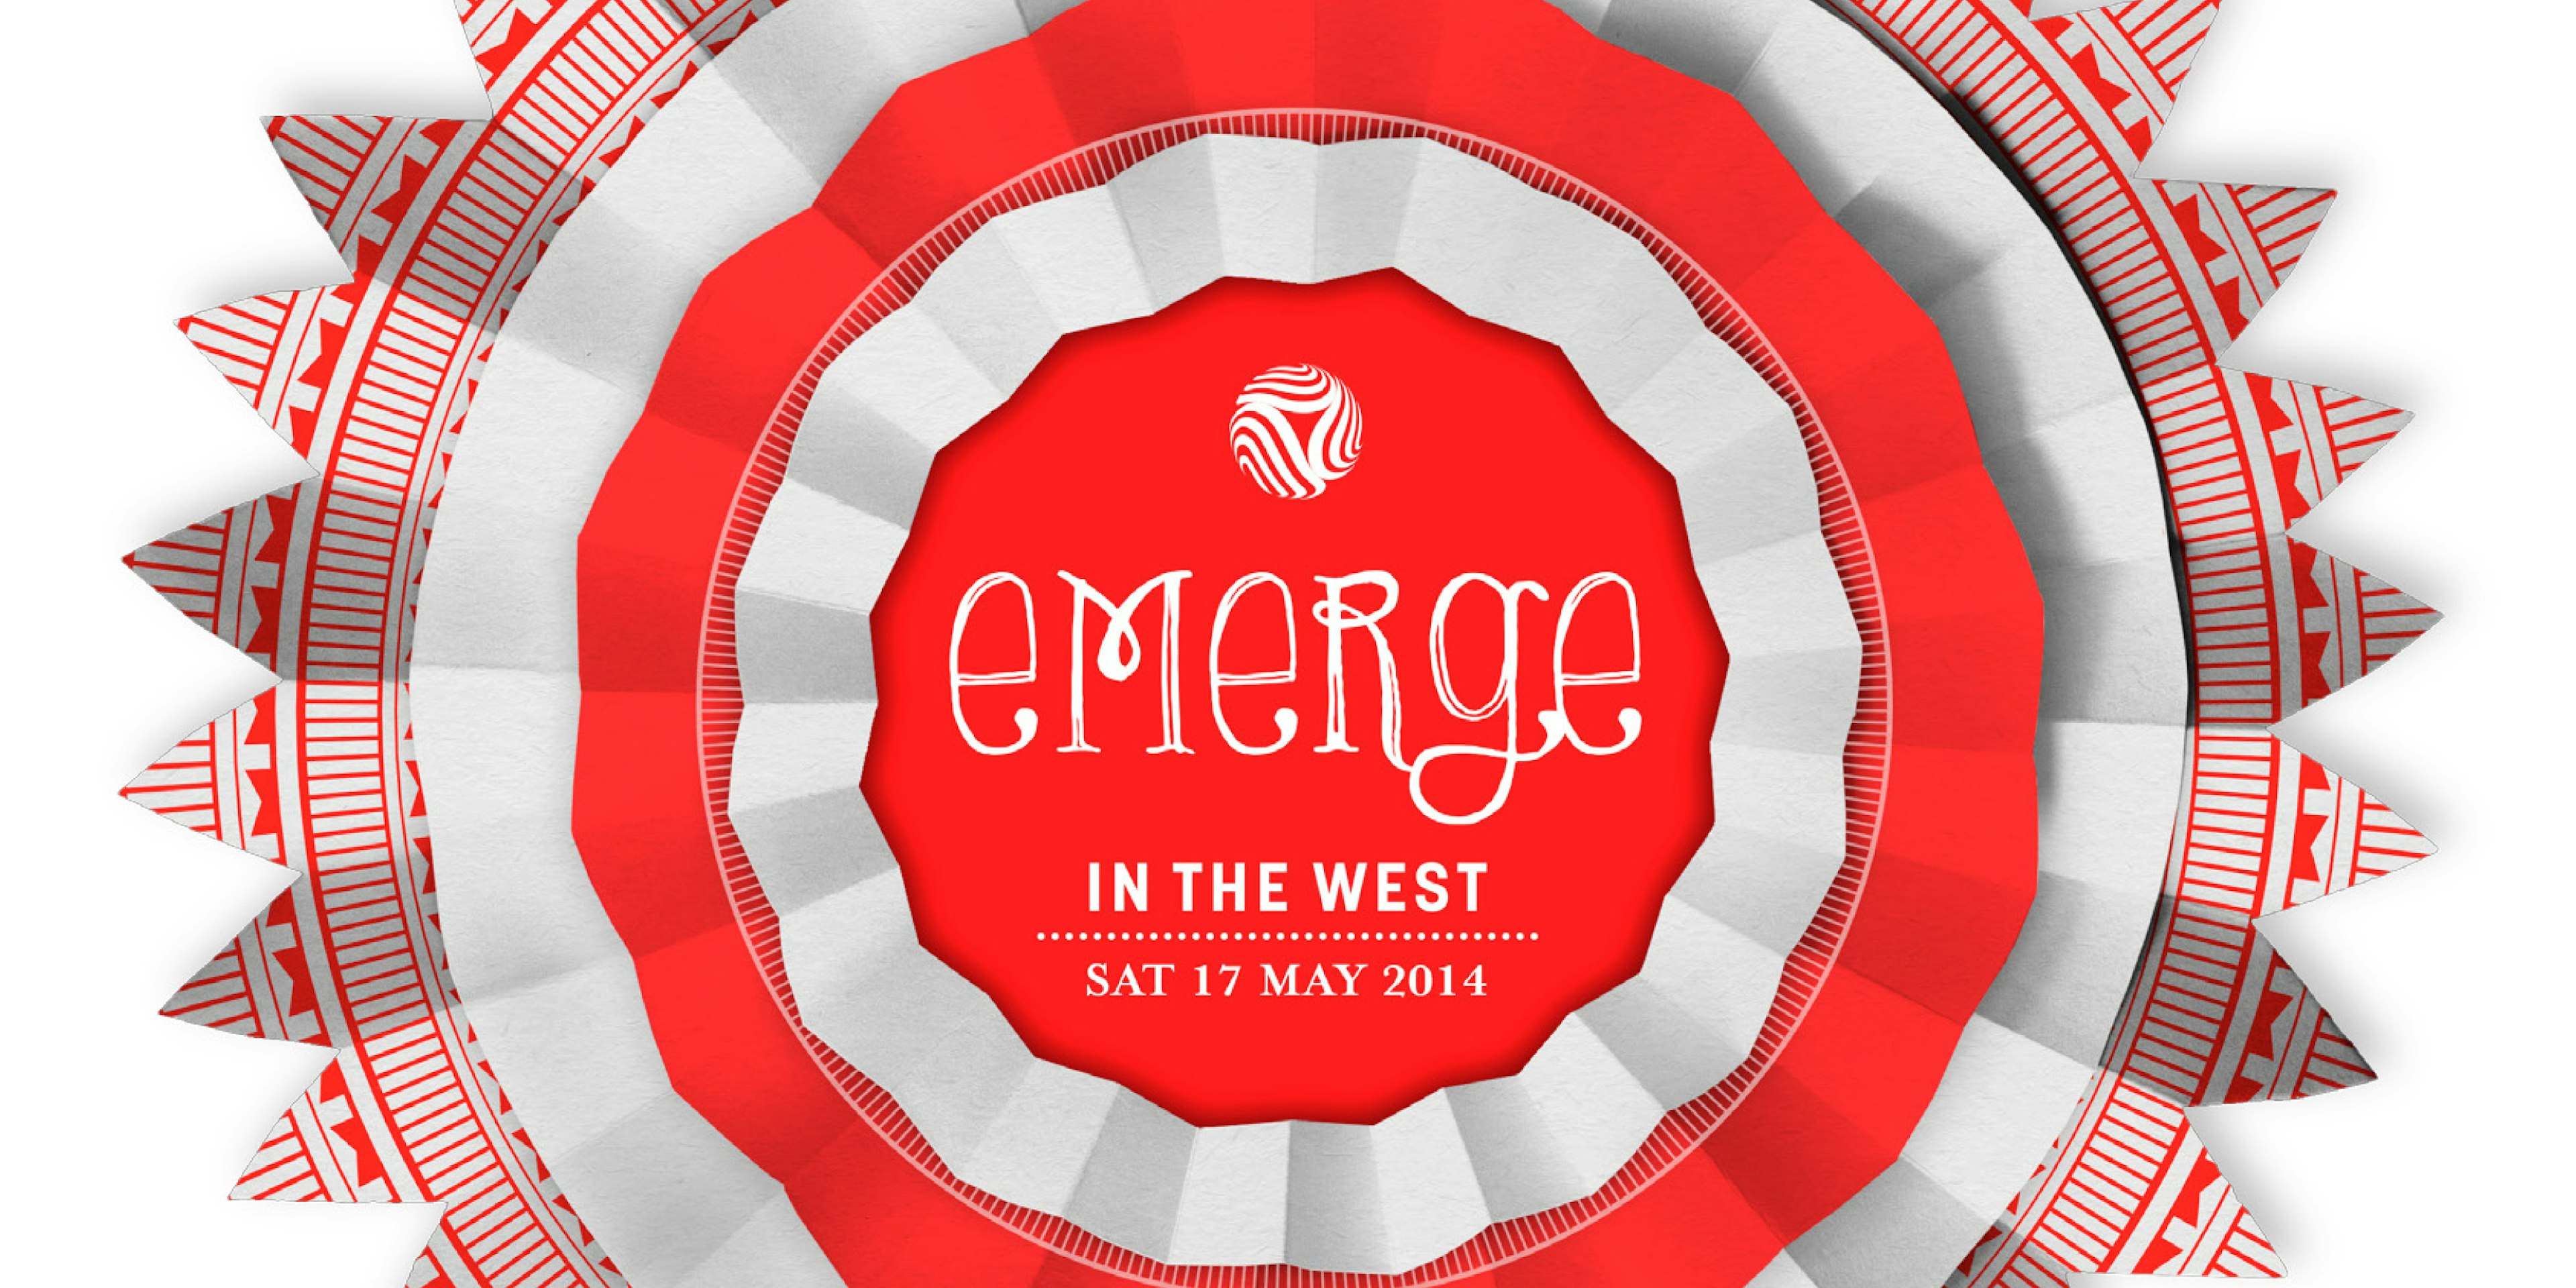 MULTICULTURAL ARTS VICTORIA: Emerge in the west Exhibition